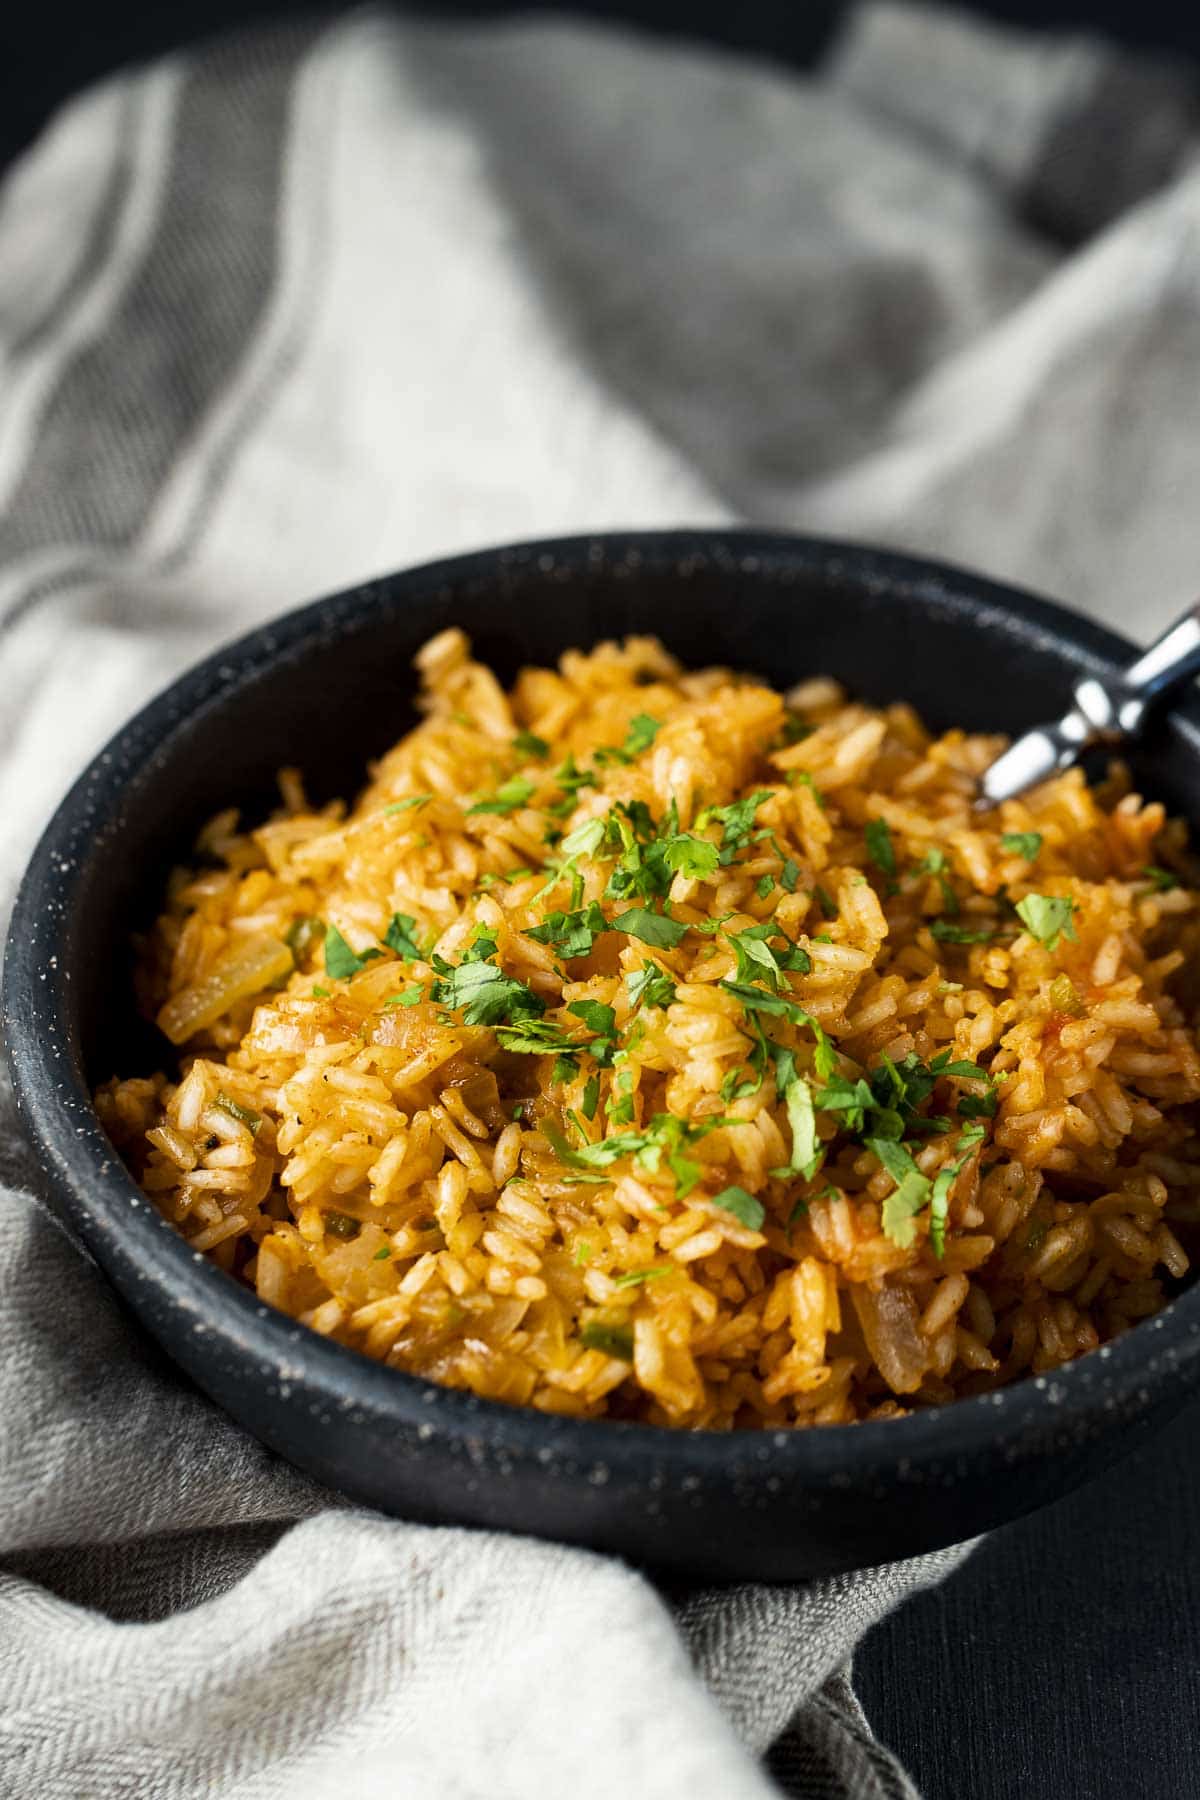 https://www.wenthere8this.com/wp-content/uploads/2021/05/instant-pot-spanish-rice-4.jpg